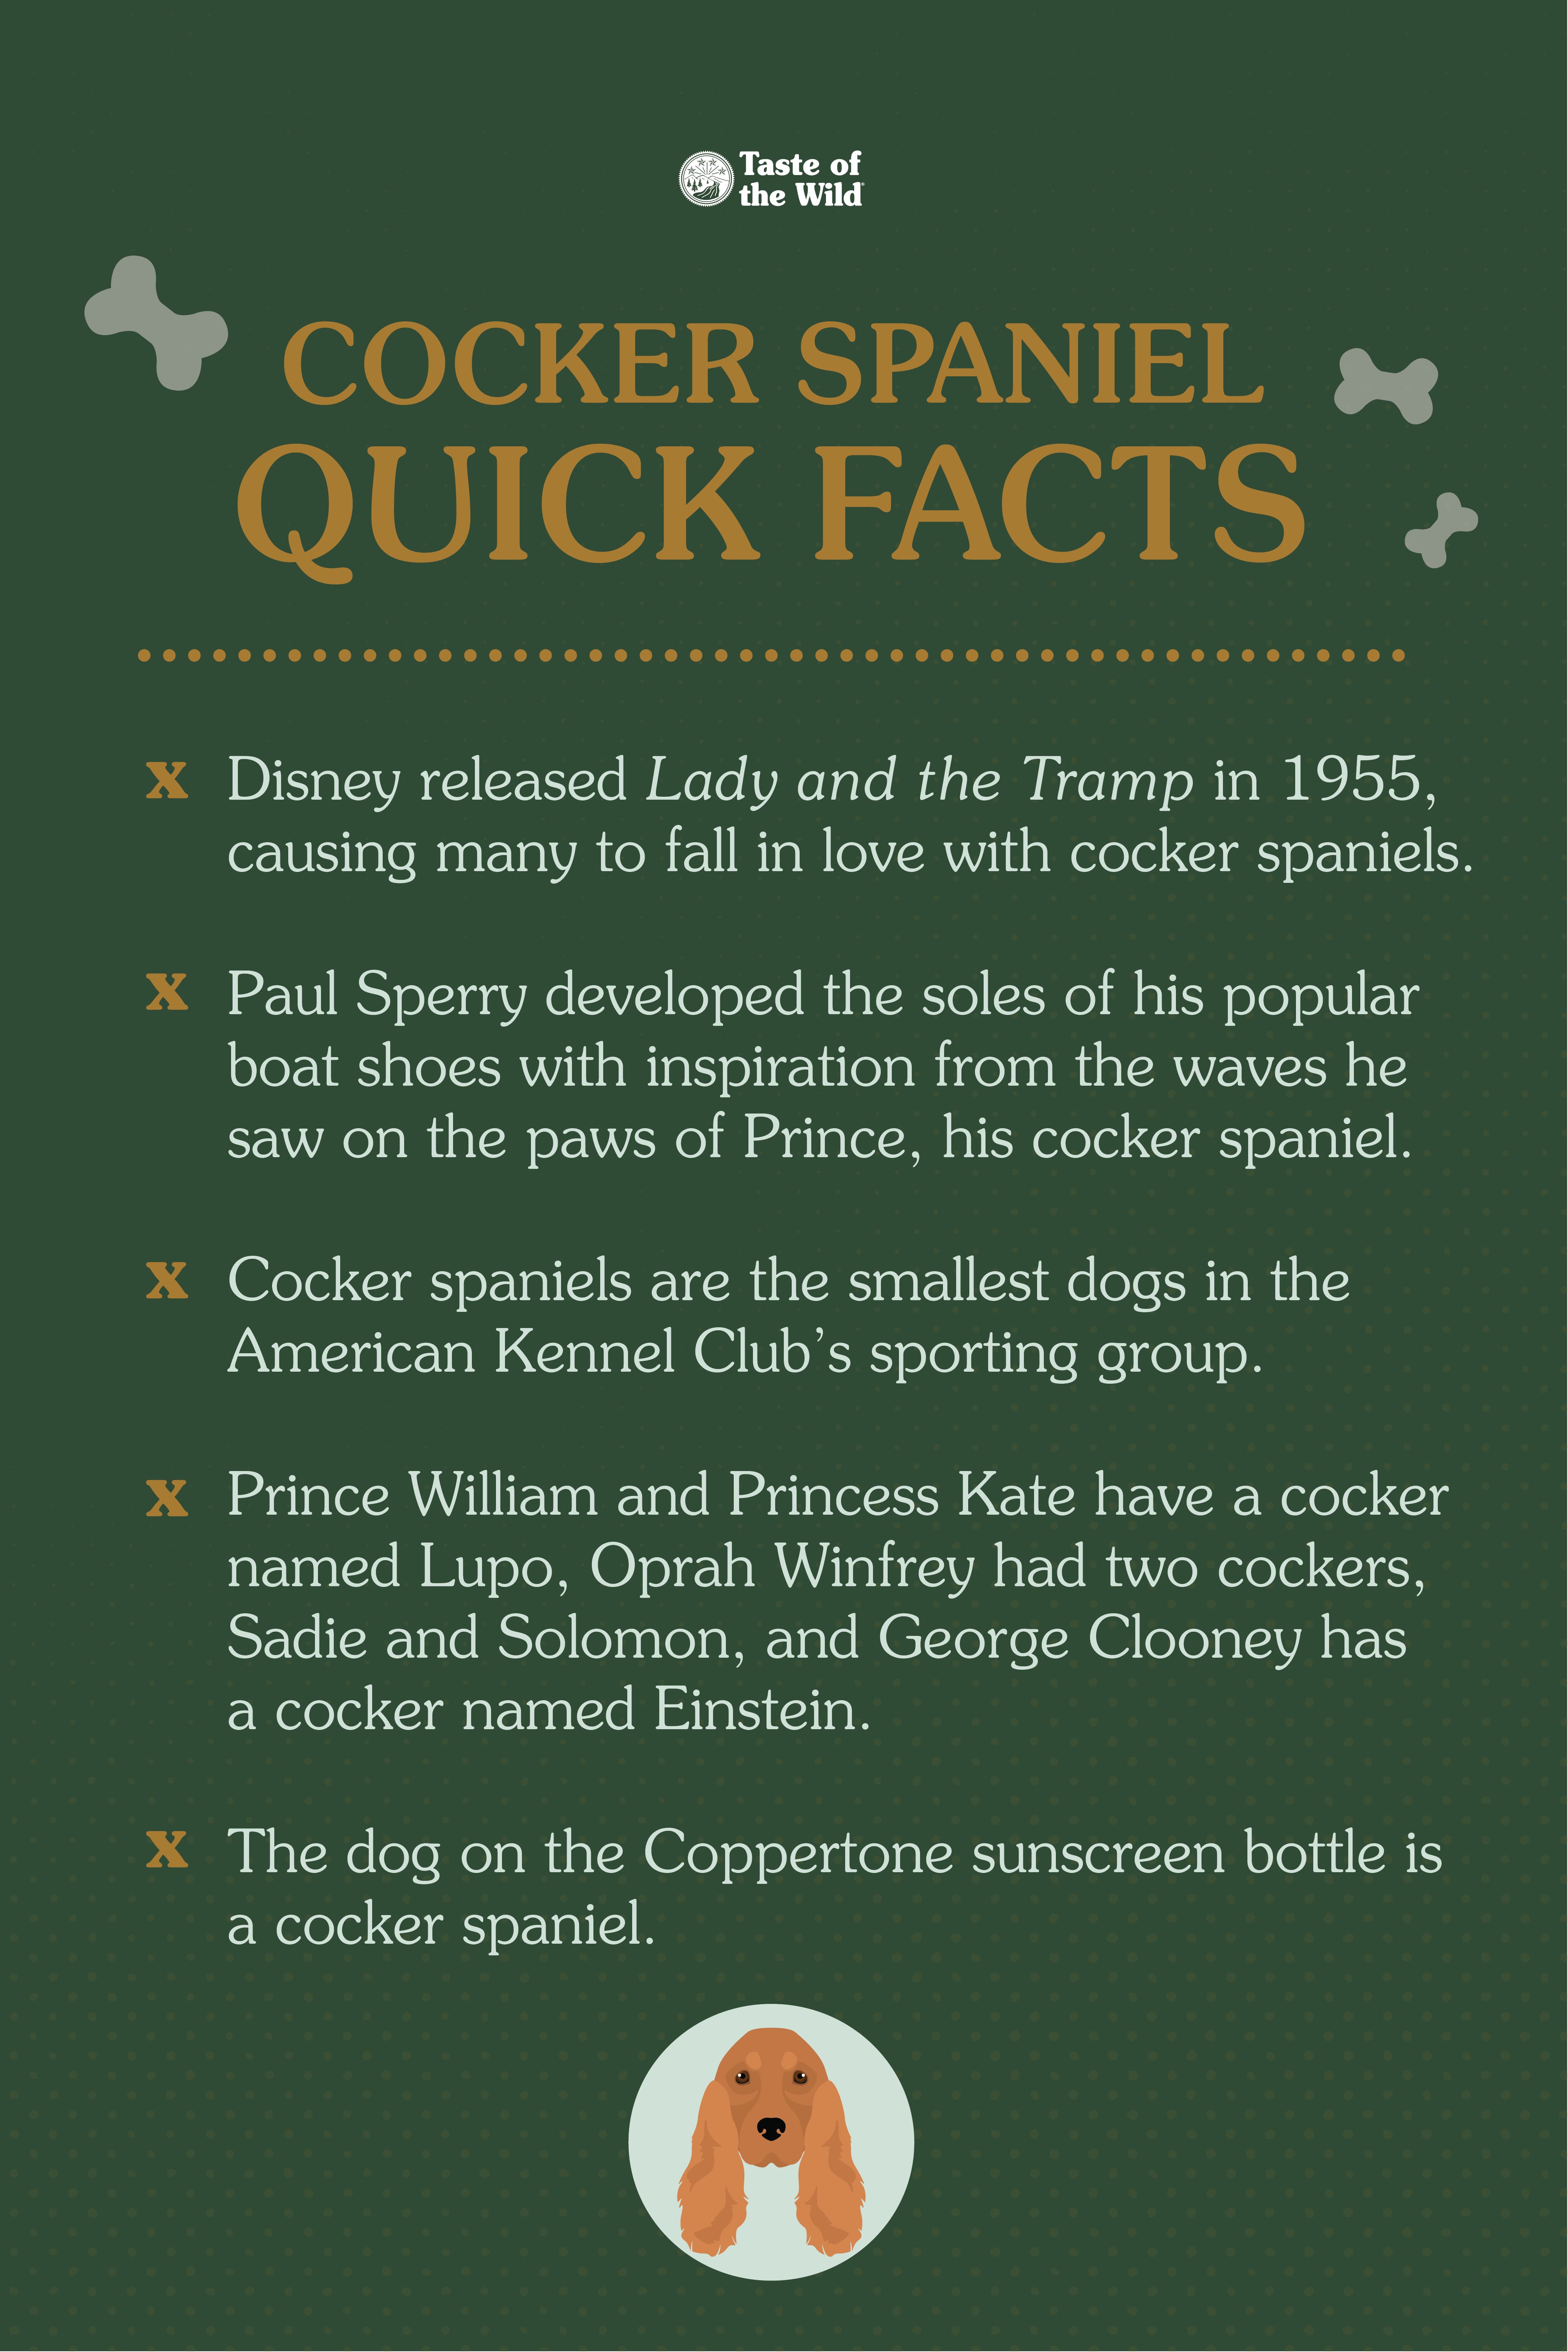 An interior graphic listing five quick facts about cocker spaniels.